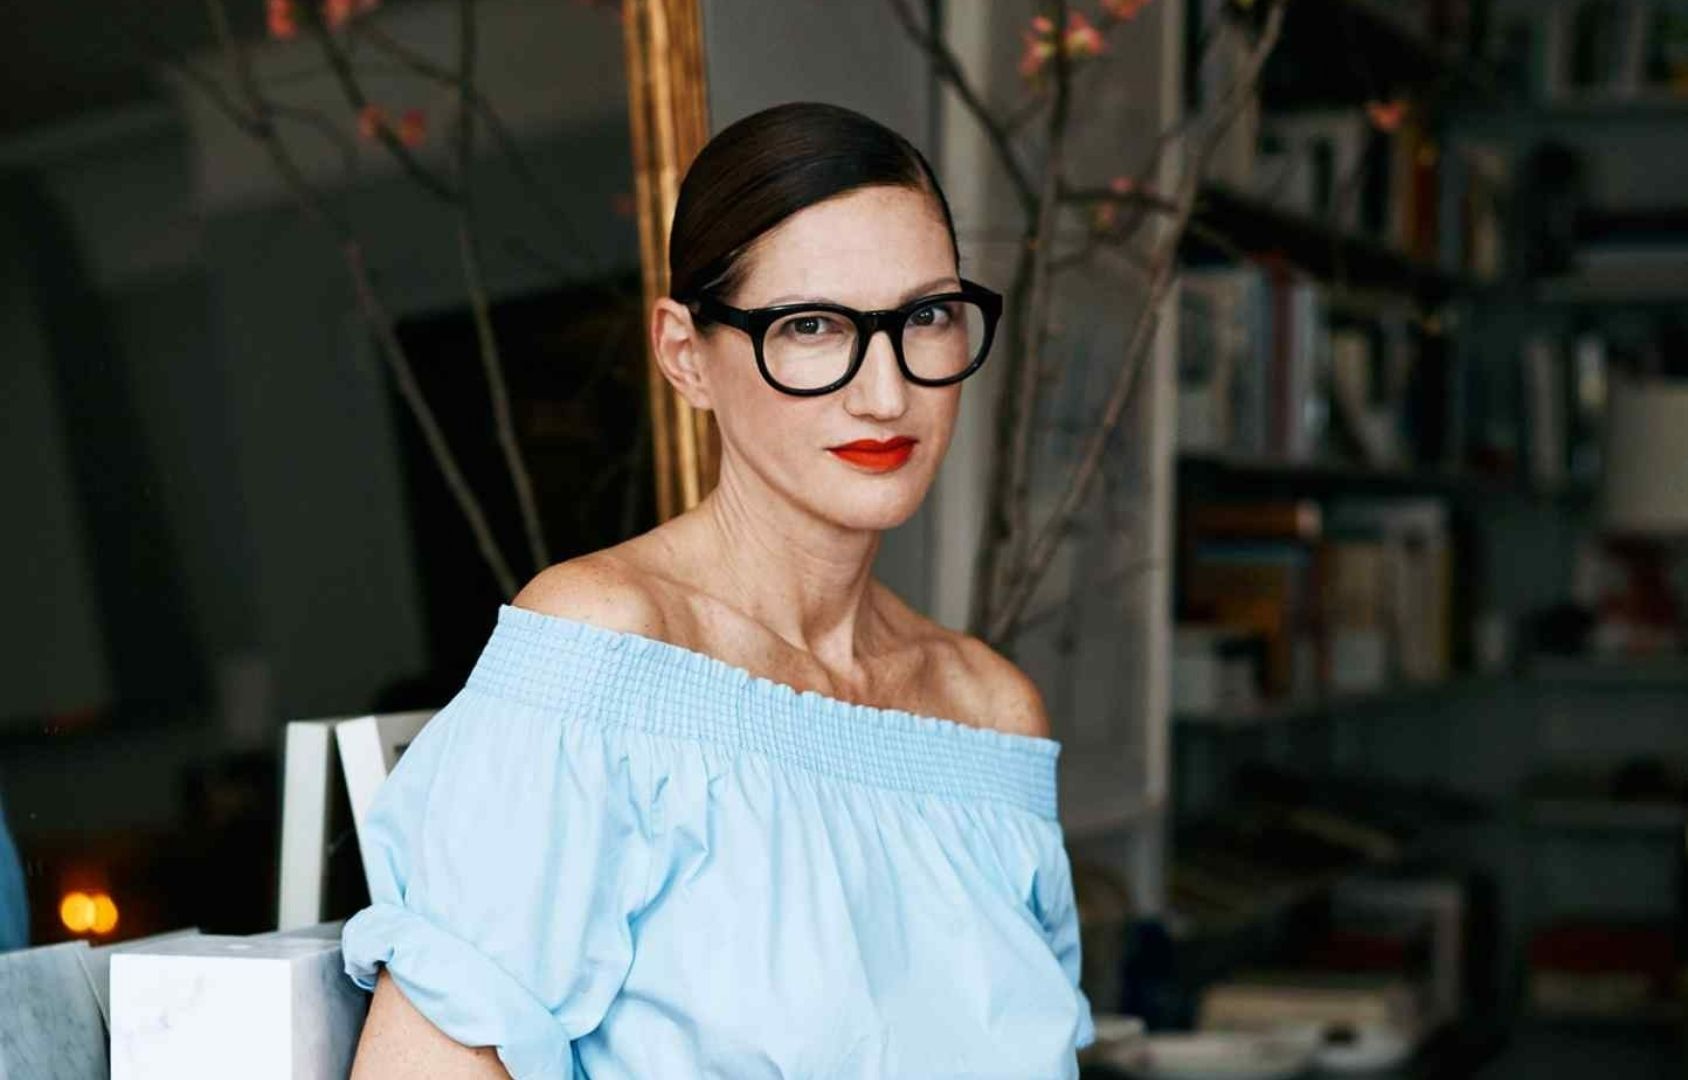 Financial Times feature Jenna Lyons in her MENSCH